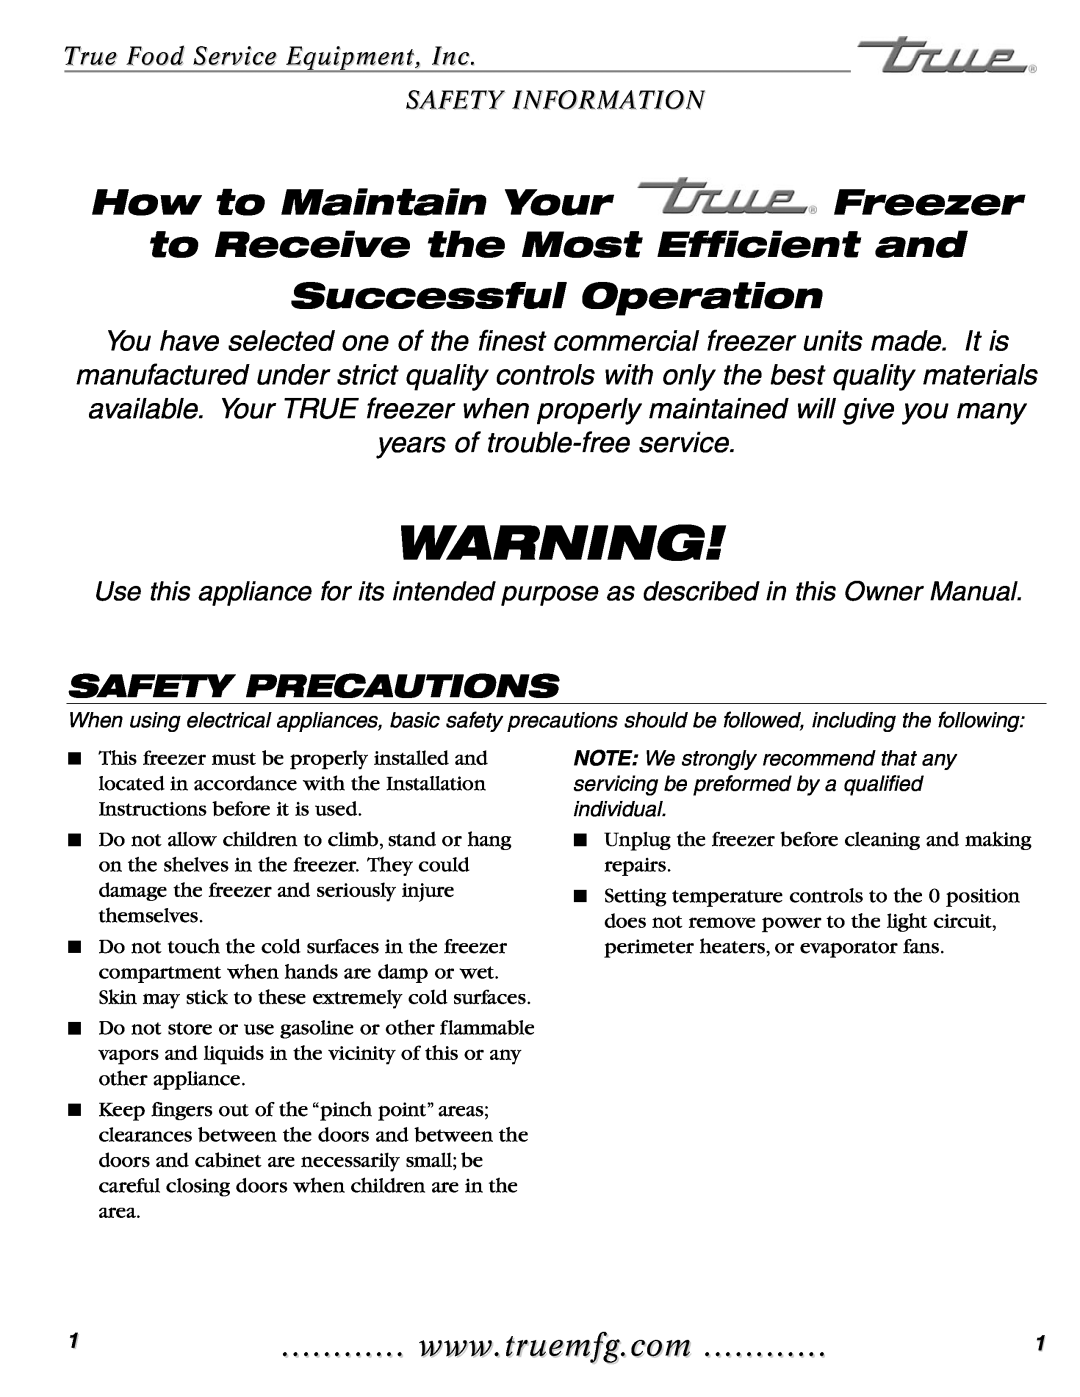 True Manufacturing Company GDIM-49, GDIM-26NT Safety Precautions, Safety Information, How to Maintain Your Freezer 